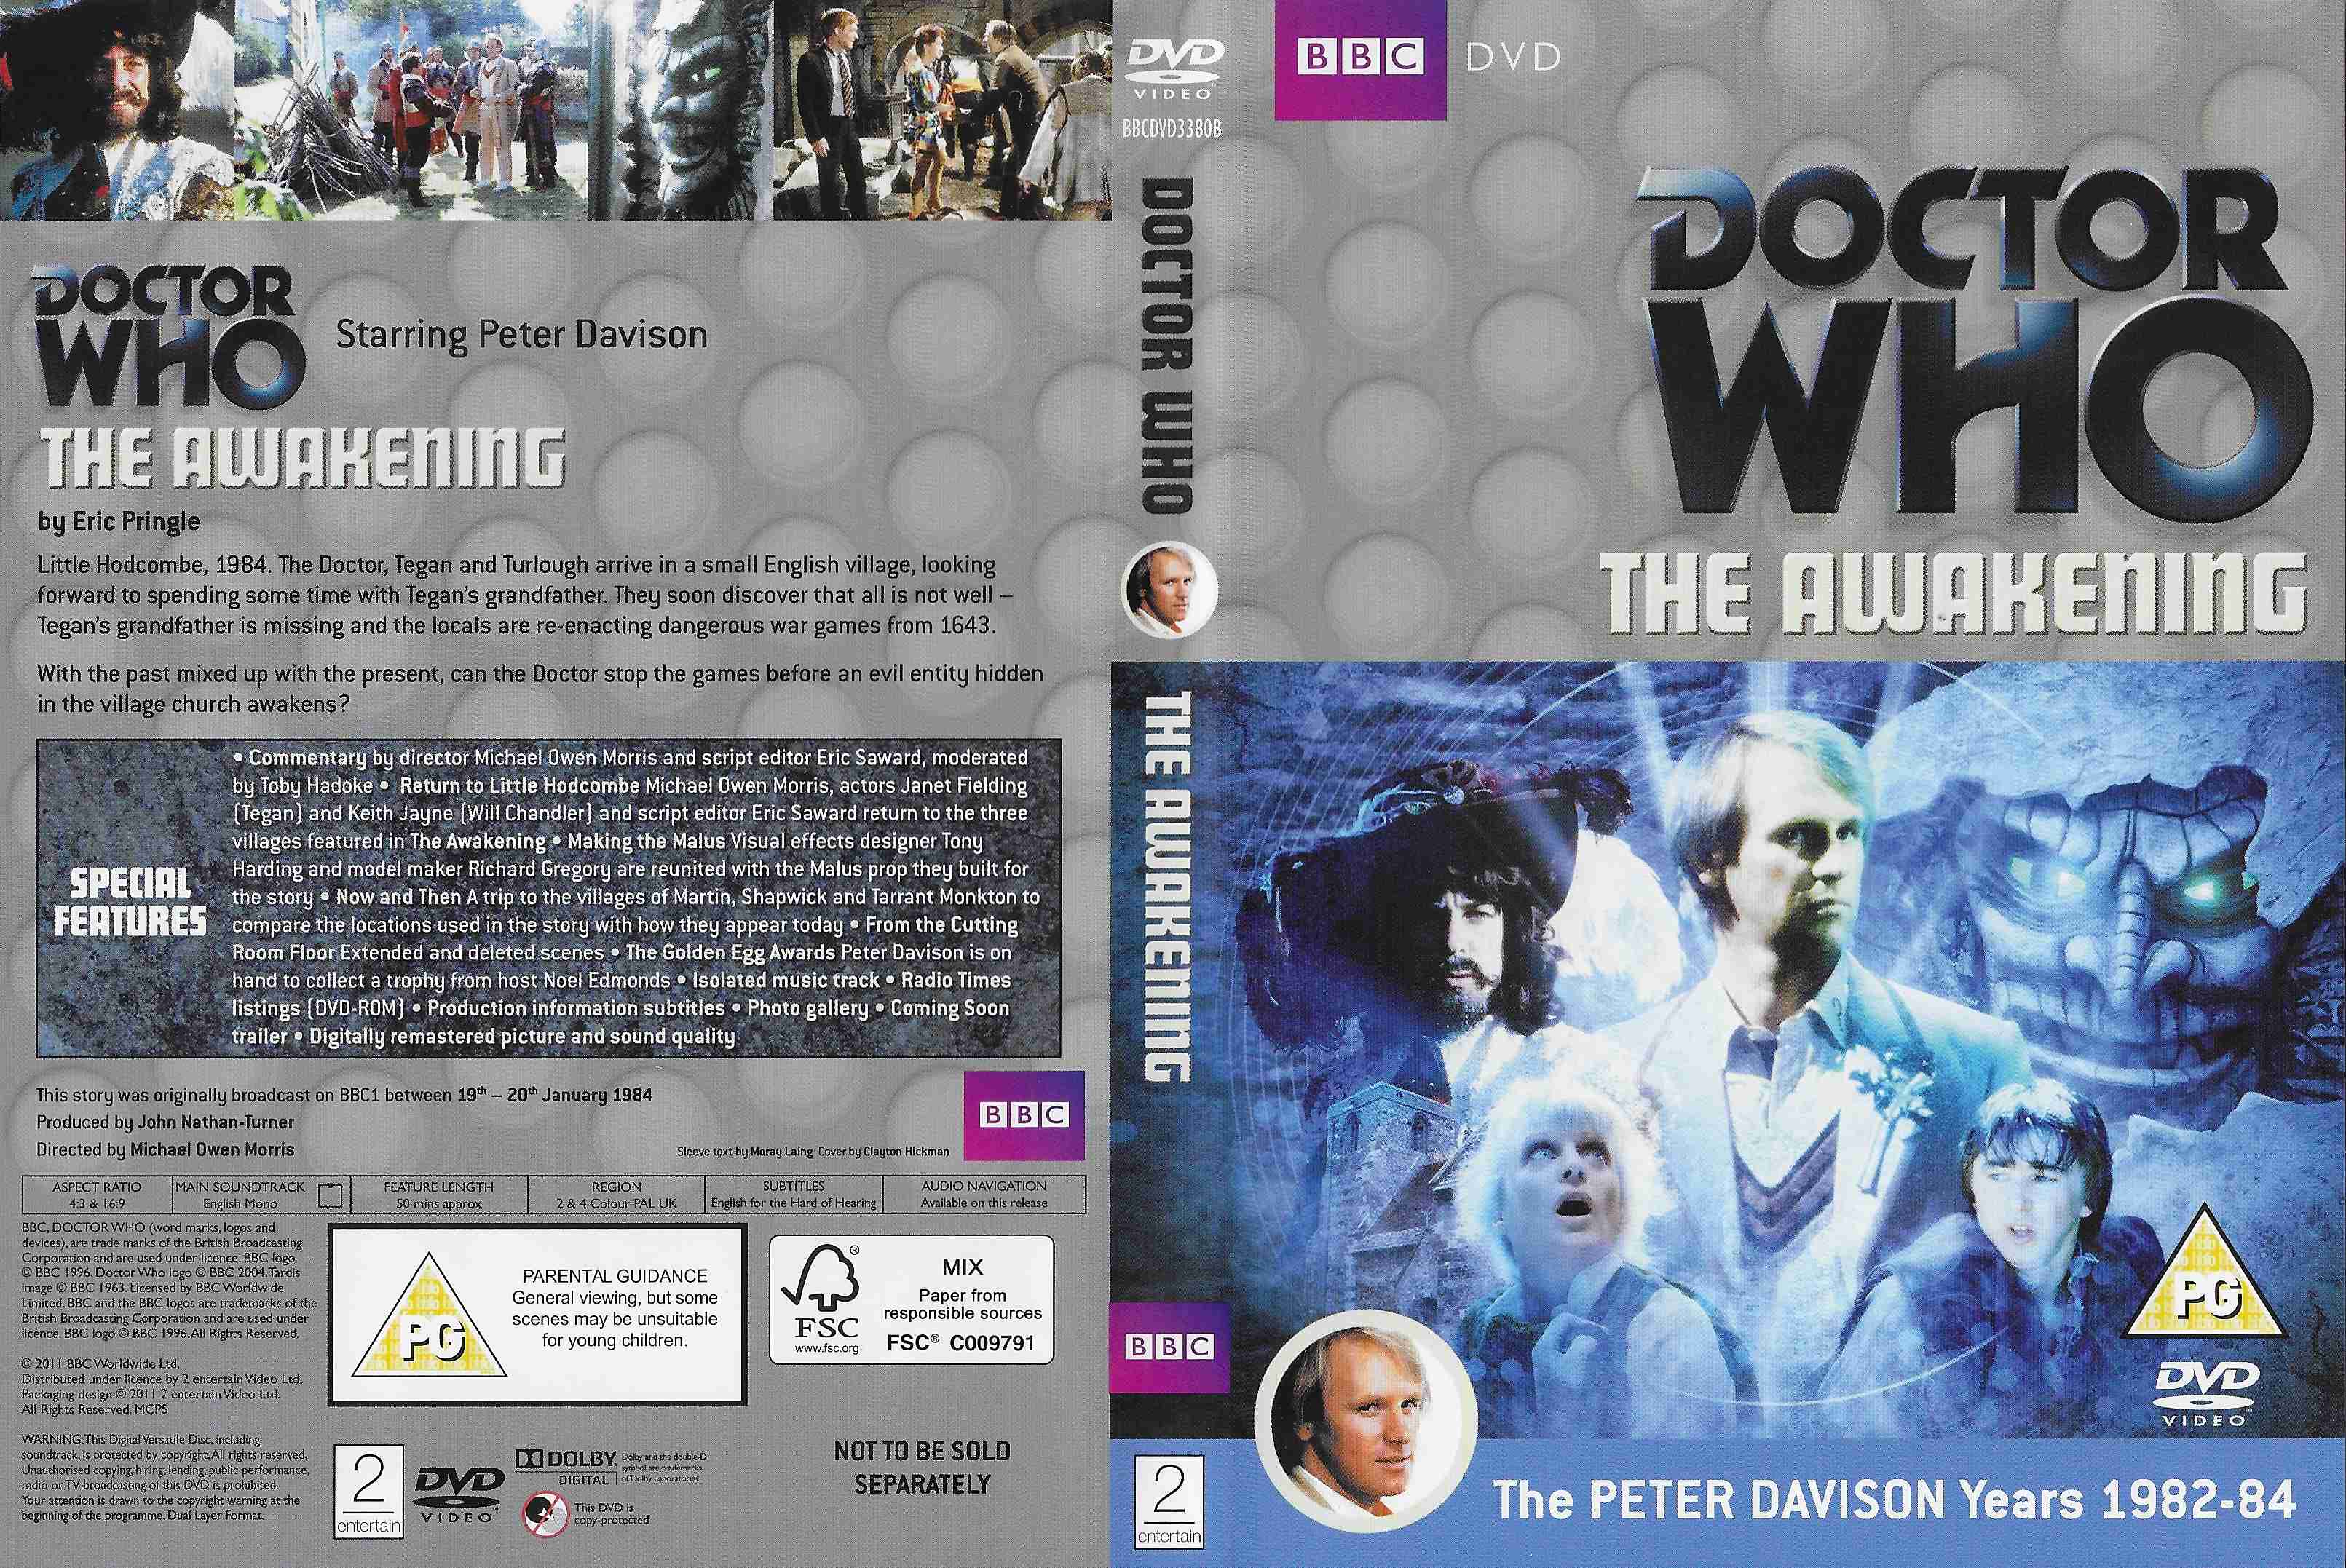 Picture of BBCDVD 3380B Doctor Who - The awakening by artist Malcolm Hulke from the BBC records and Tapes library